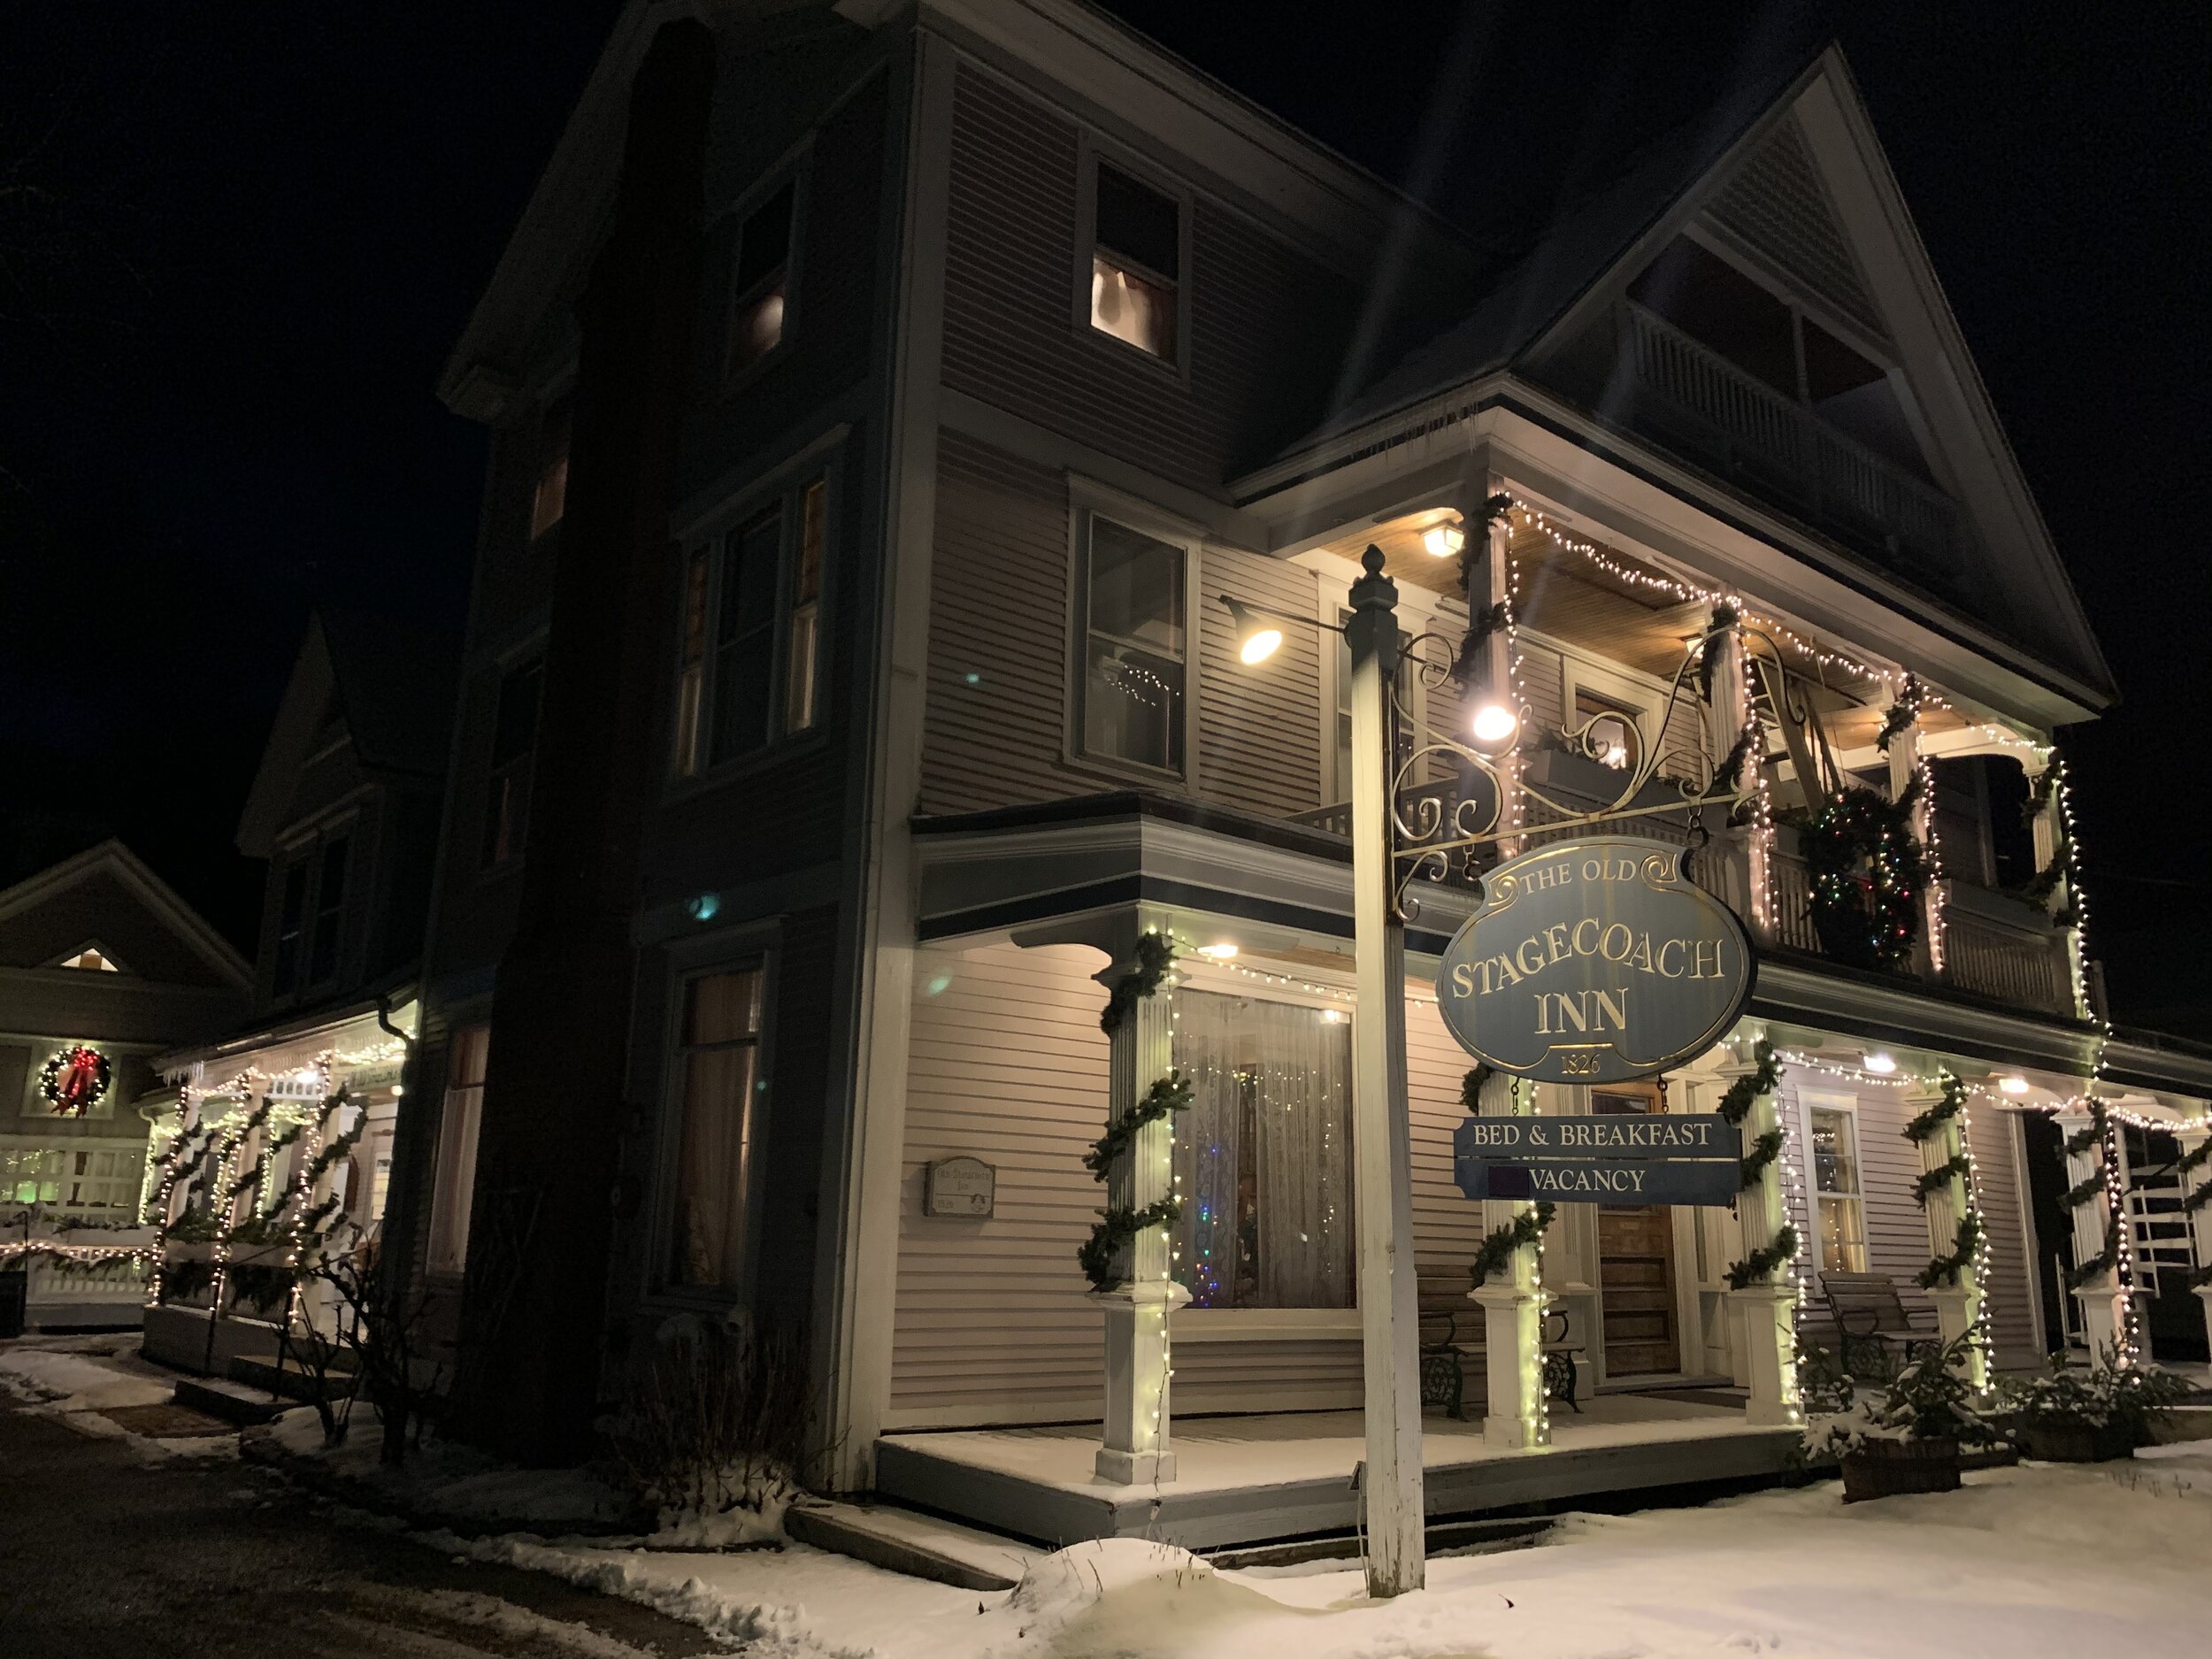   The Old Stagecoach Inn is decked out for the holidays. Photo by Lisa Scagliotti    